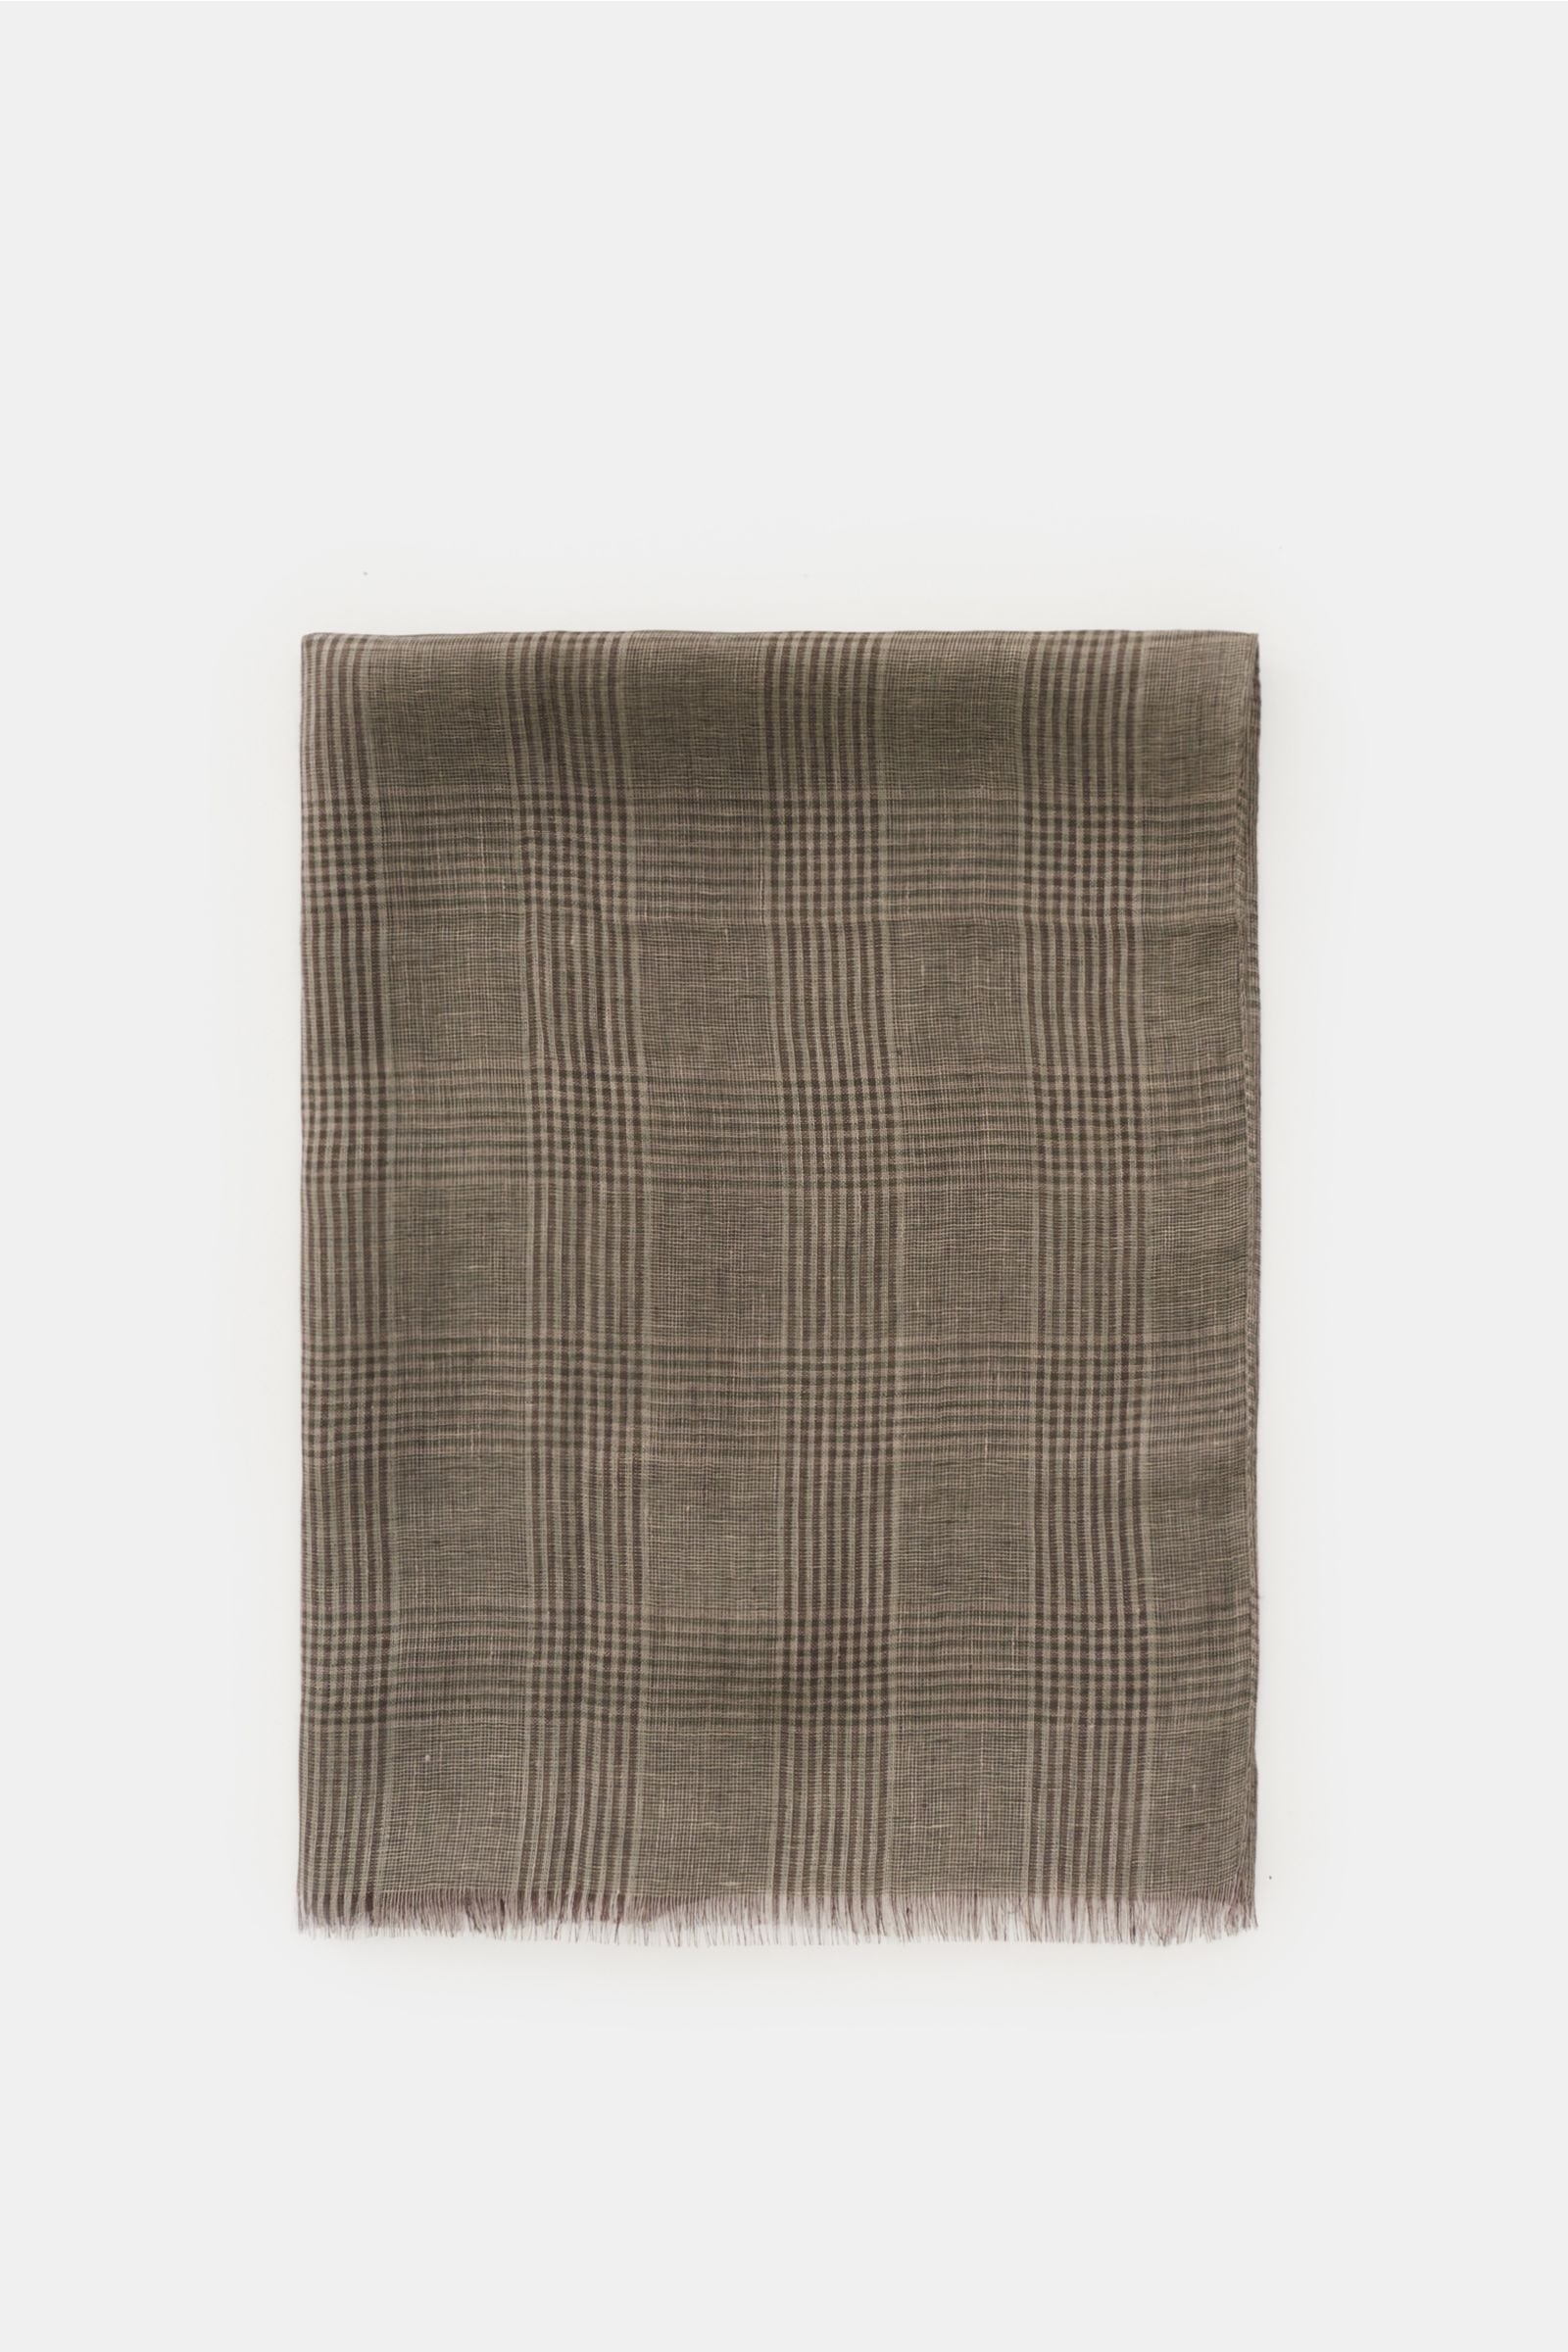 Scarf dark brown/olive checked